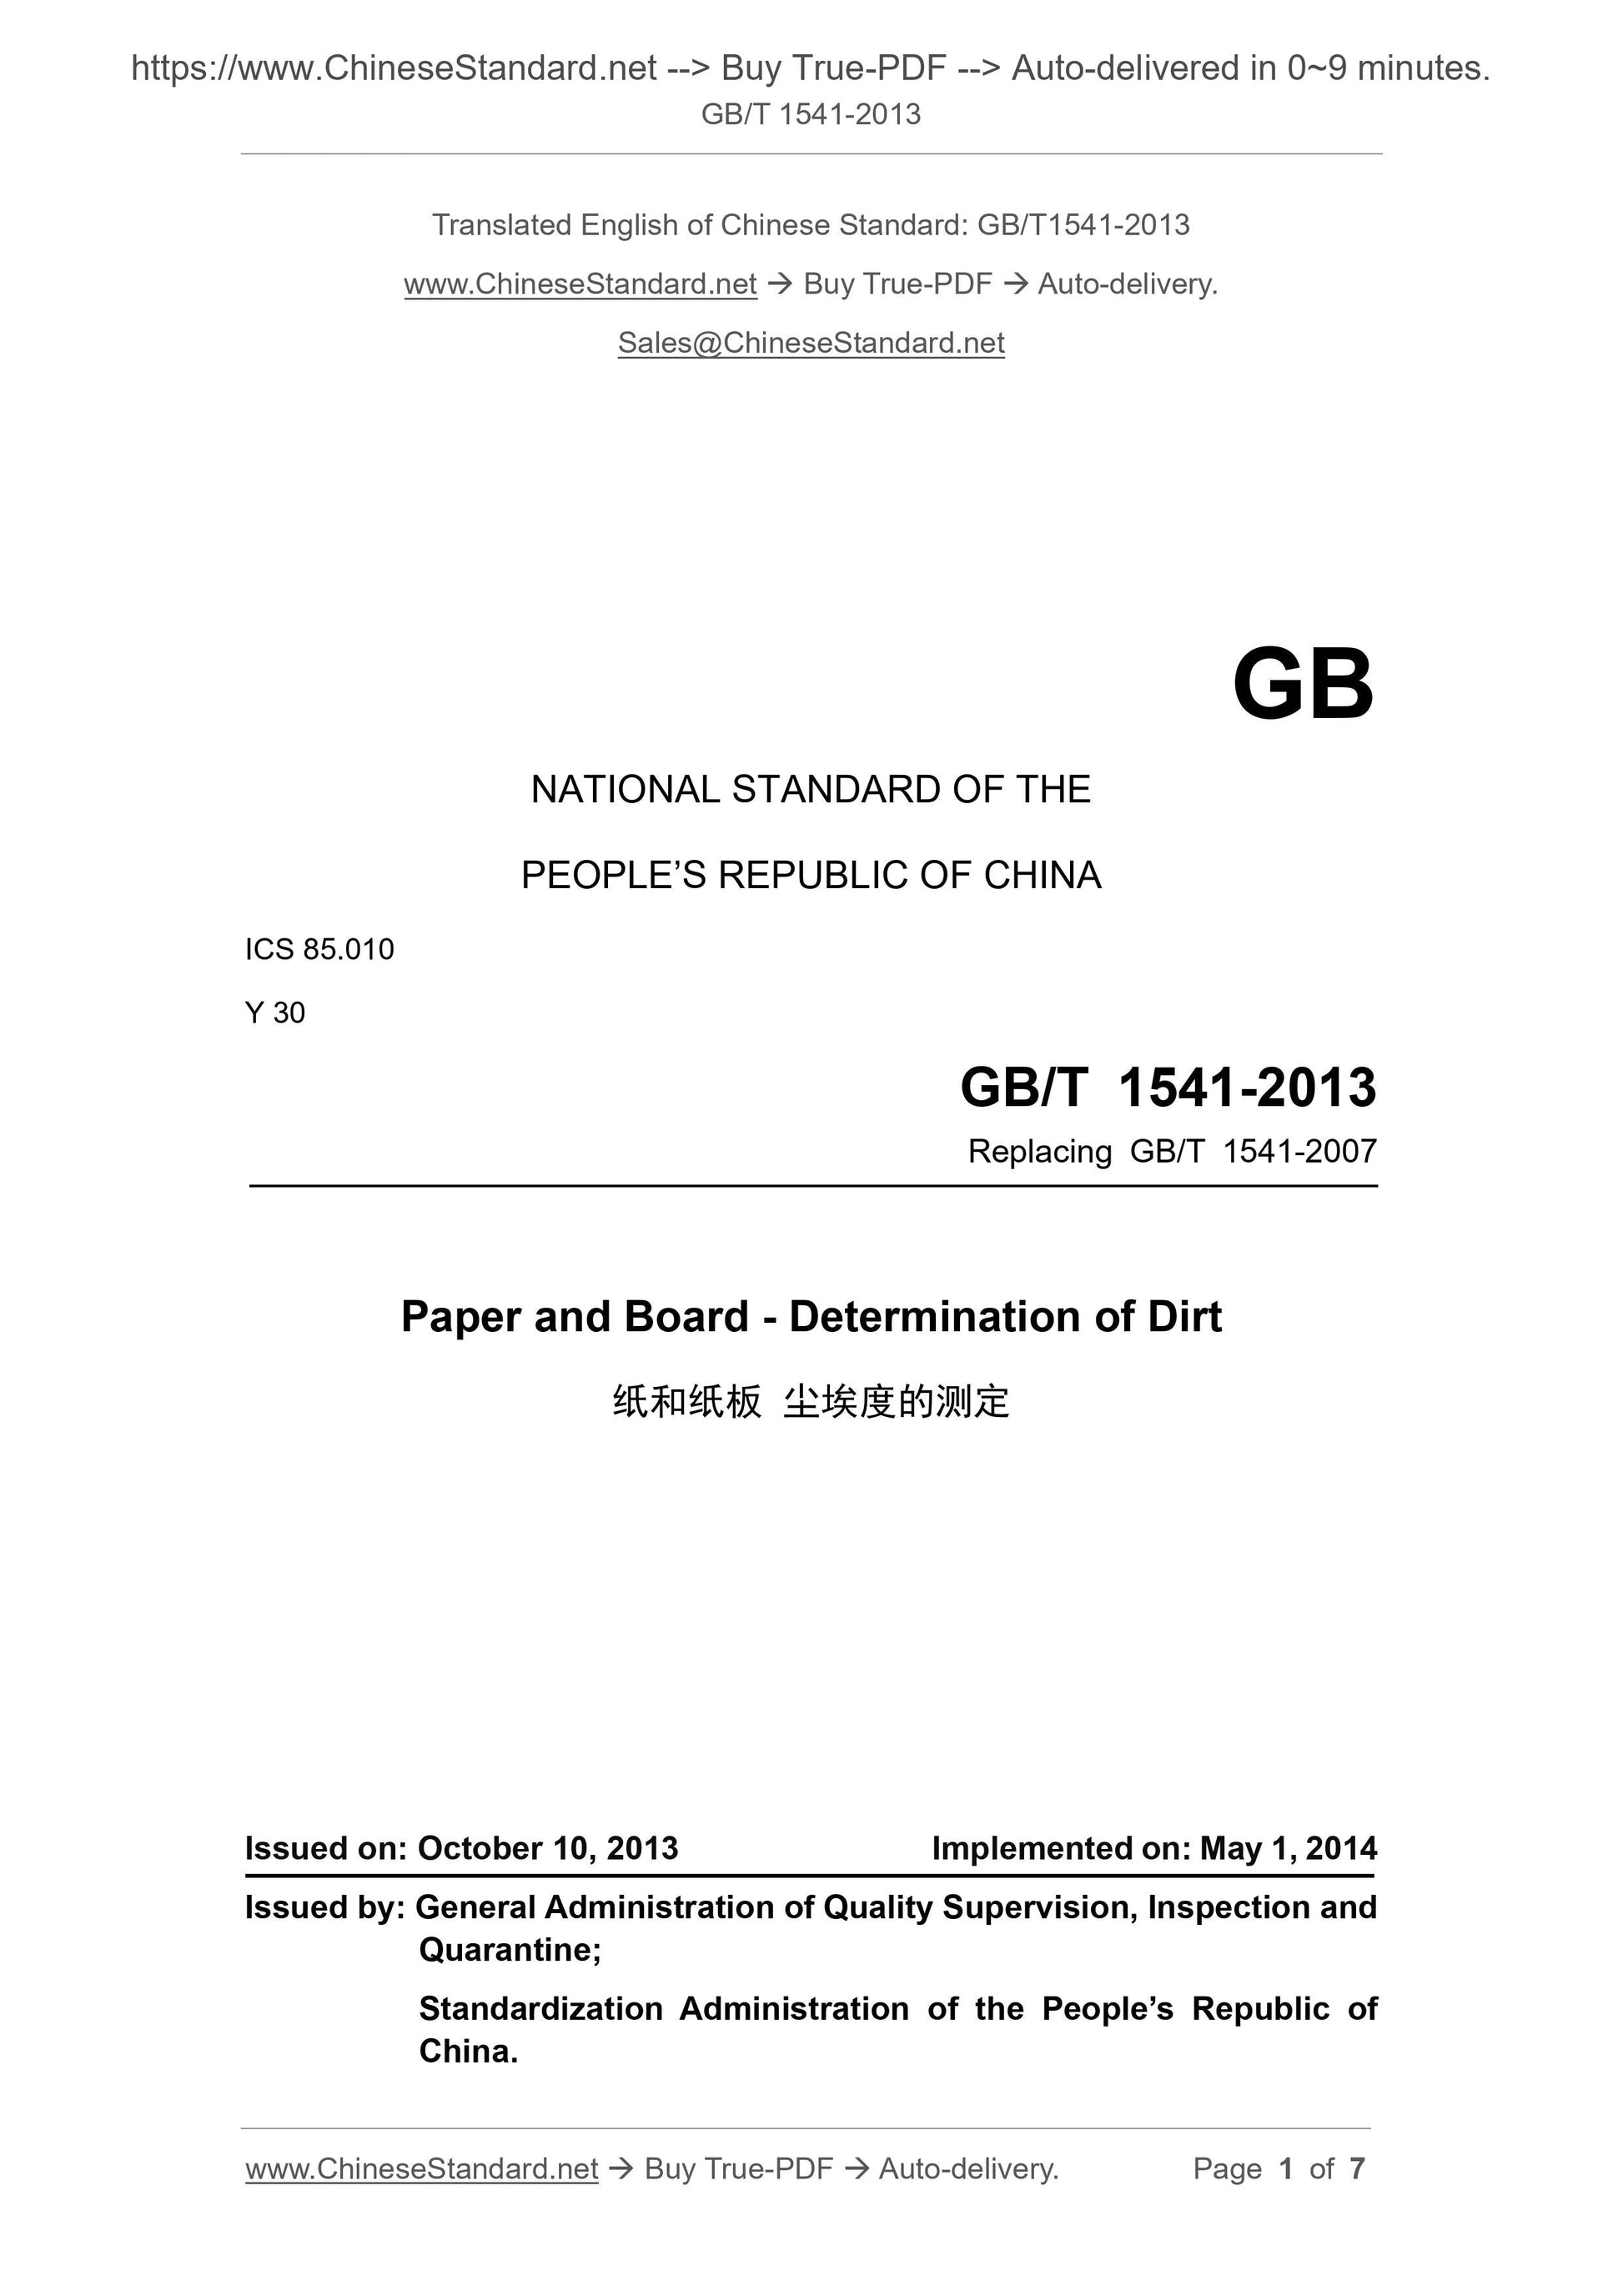 GB/T 1541-2013 Page 1